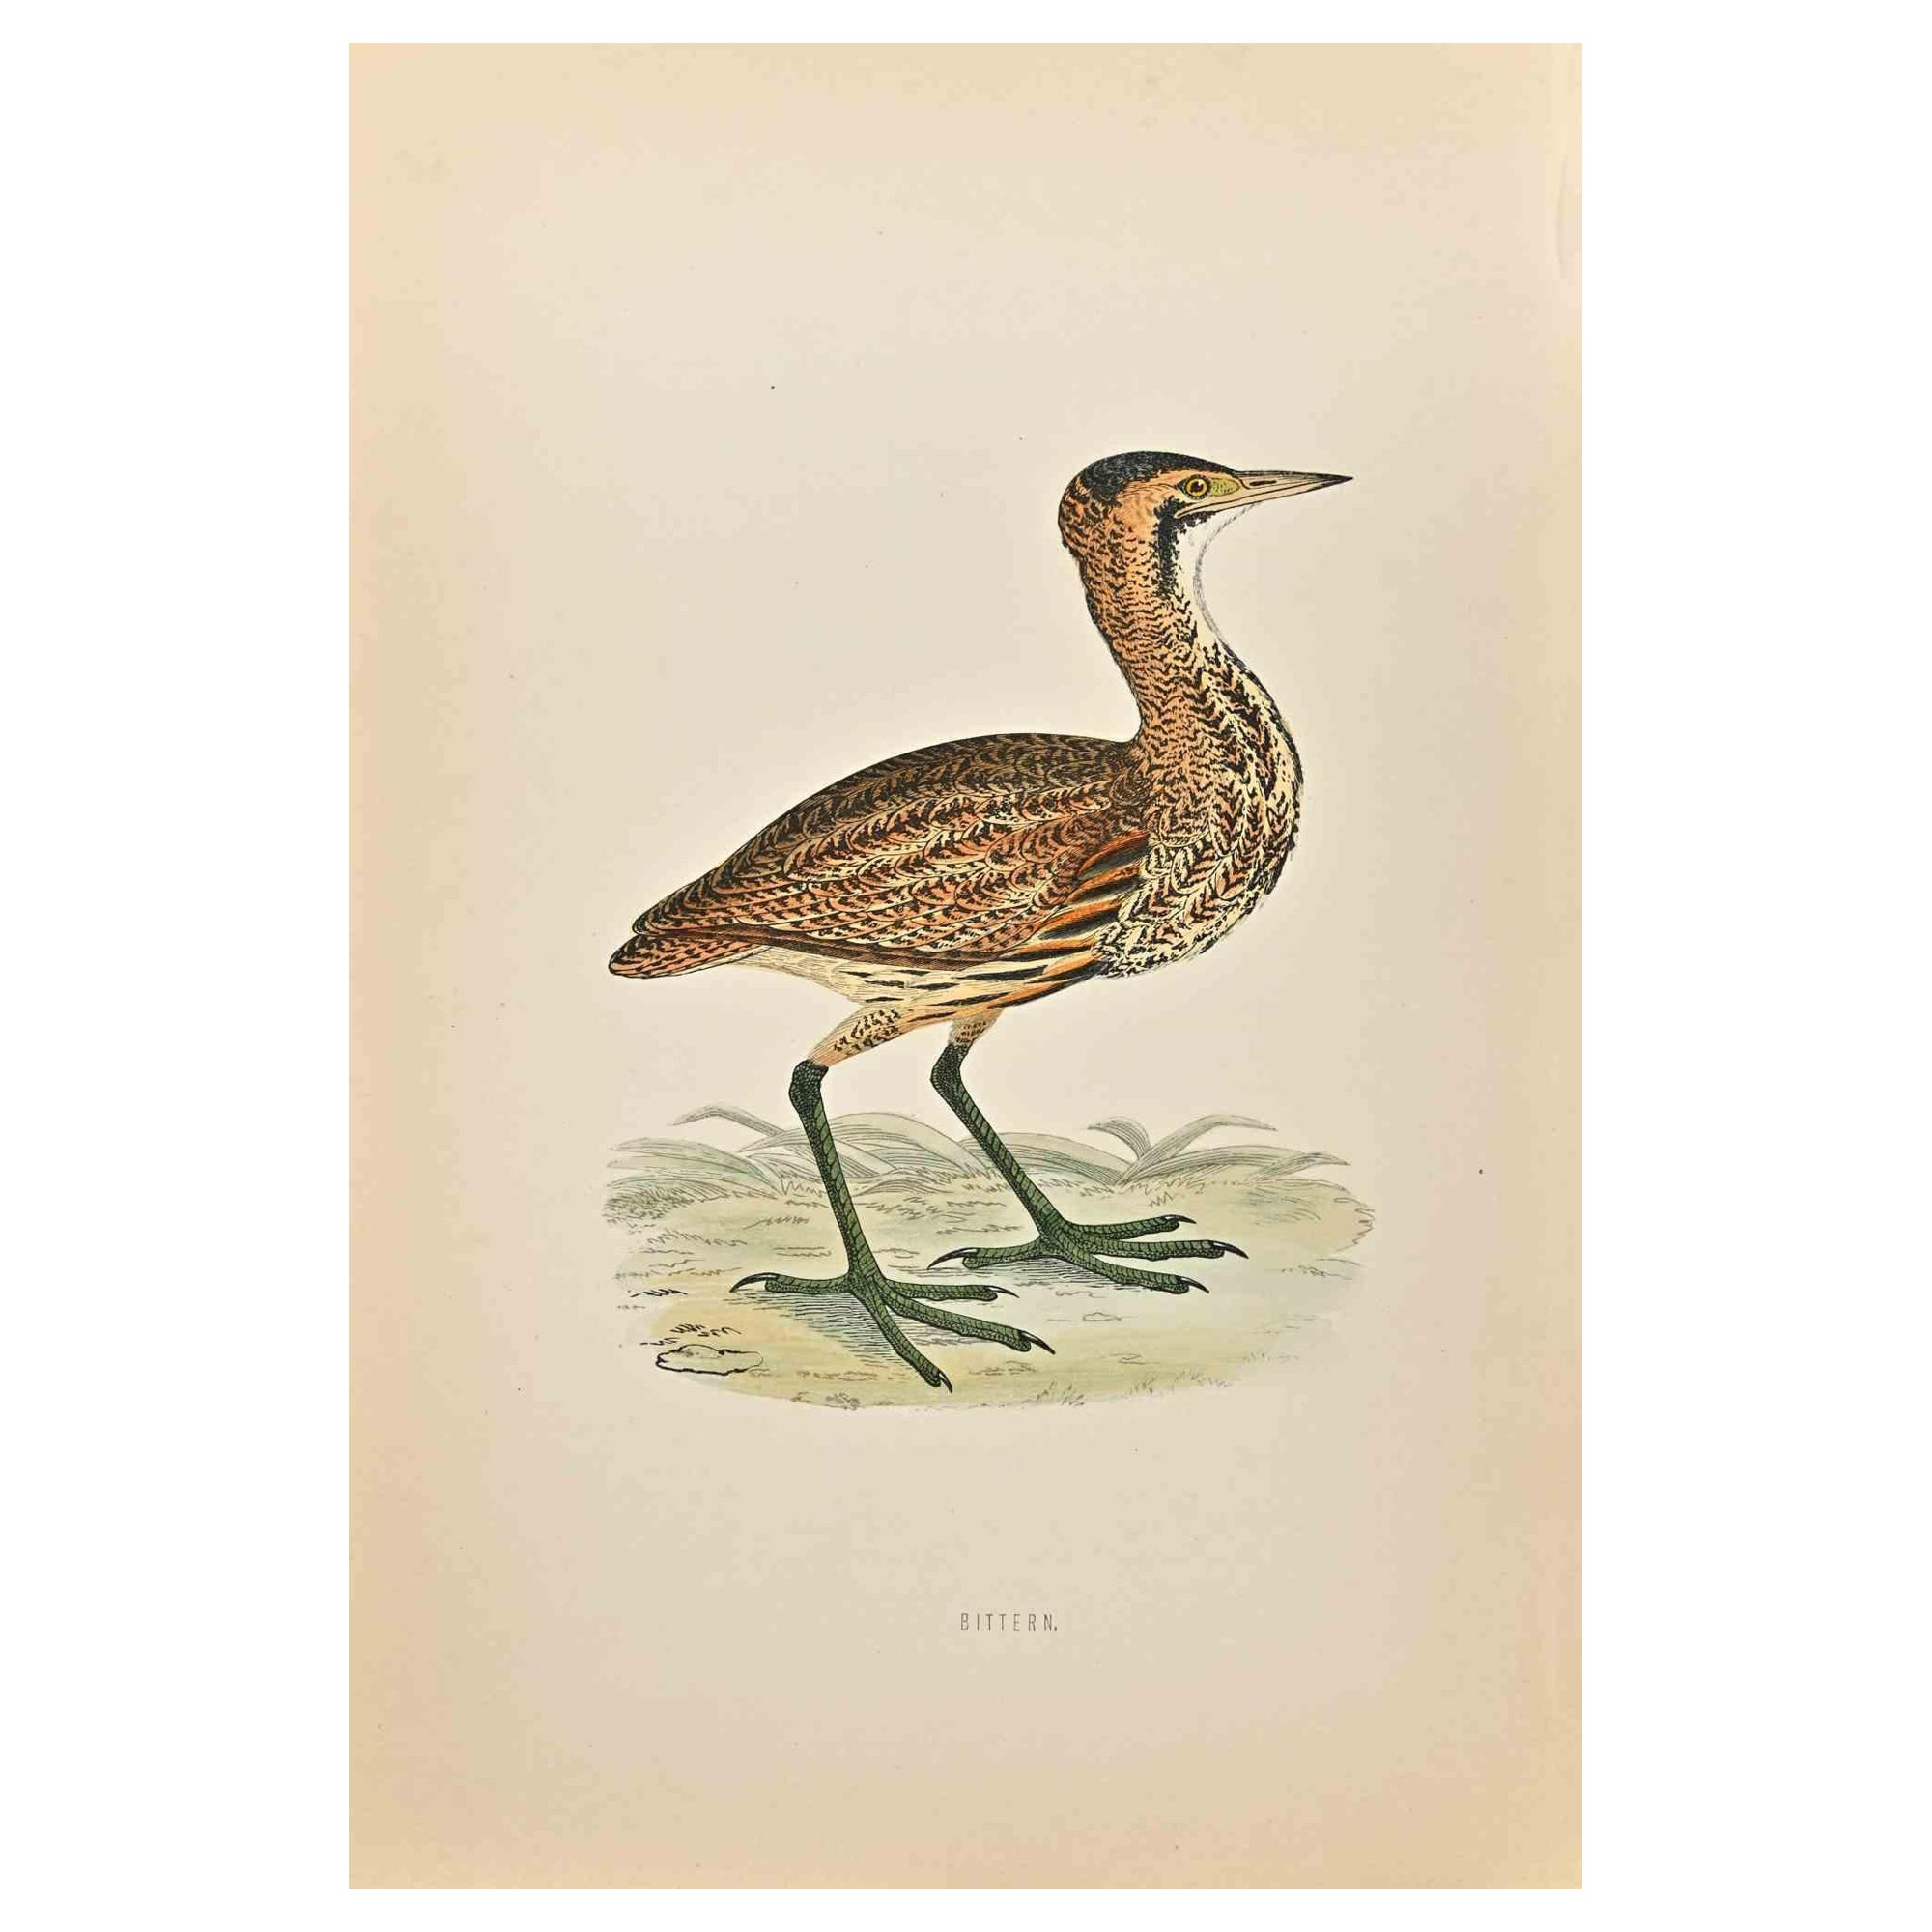 Bittern is a modern artwork realized in 1870 by the British artist Alexander Francis Lydon (1836-1917).

Woodcut print on ivory-colored paper.

Hand-colored, published by London, Bell & Sons, 1870.  

The name of the bird is printed on the plate.